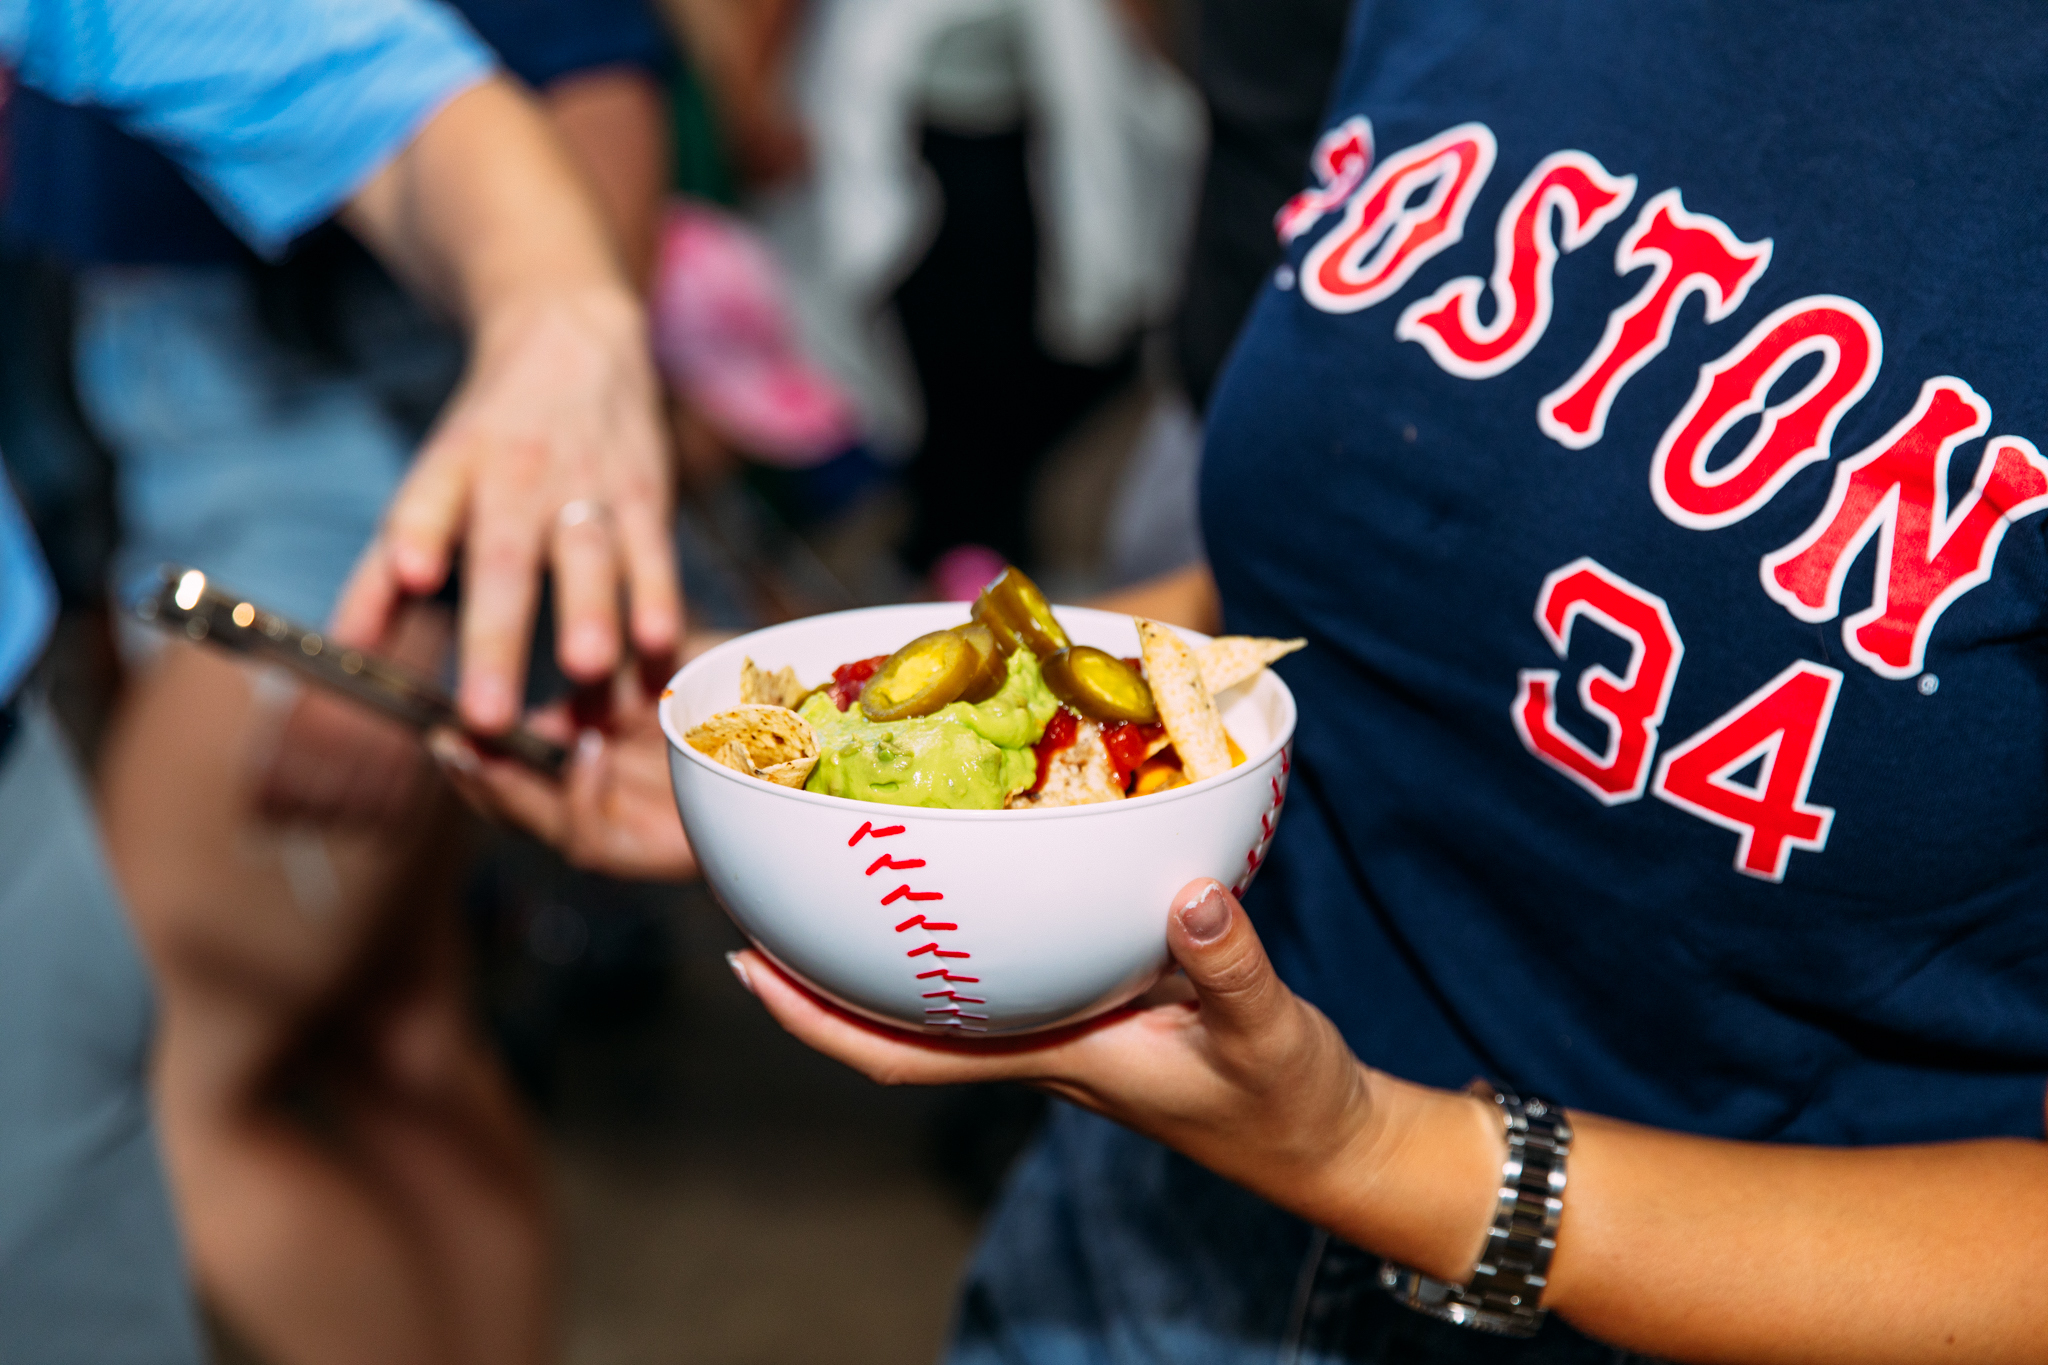 Three new things to eat near Fenway Park